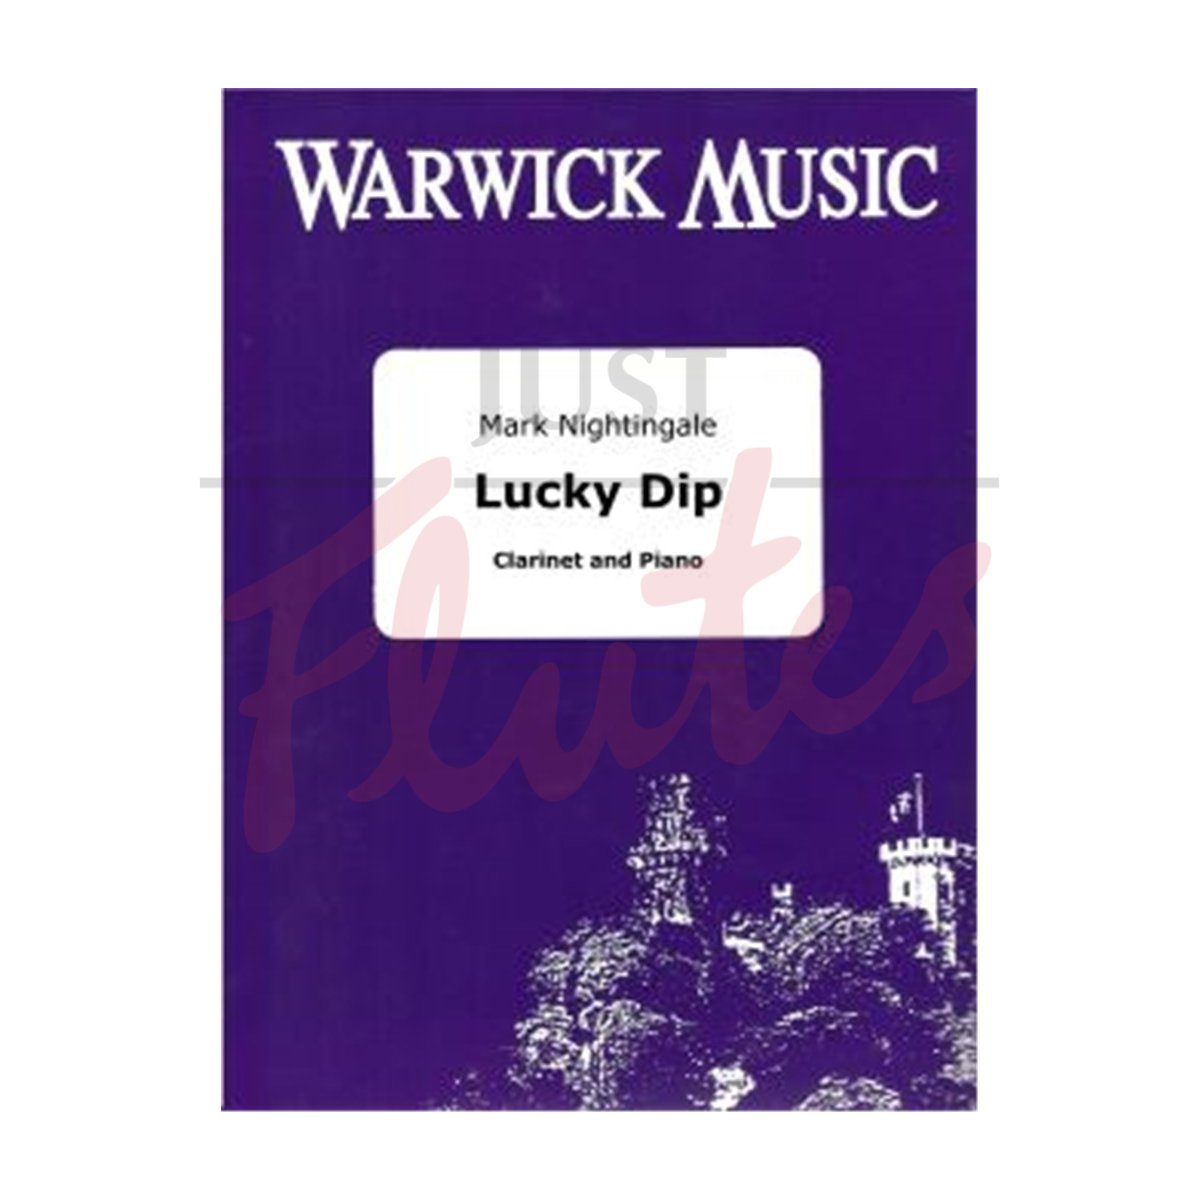 Lucky Dip for Clarinet and Piano